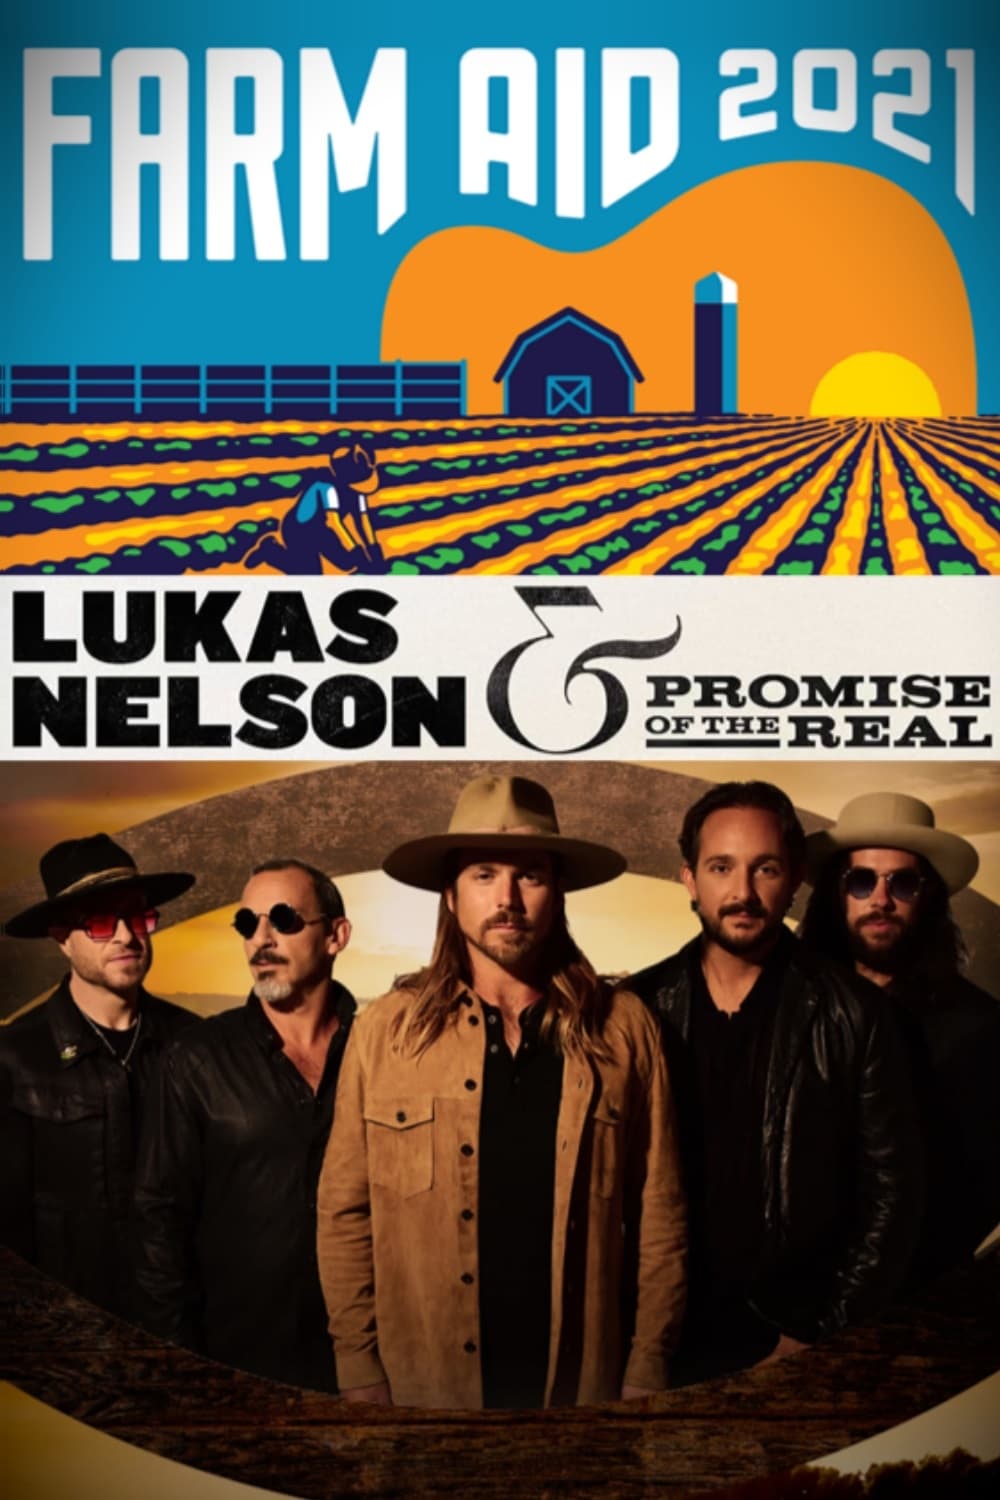 Farm Aid 2021: Lukas Nelson & Promise of the Real